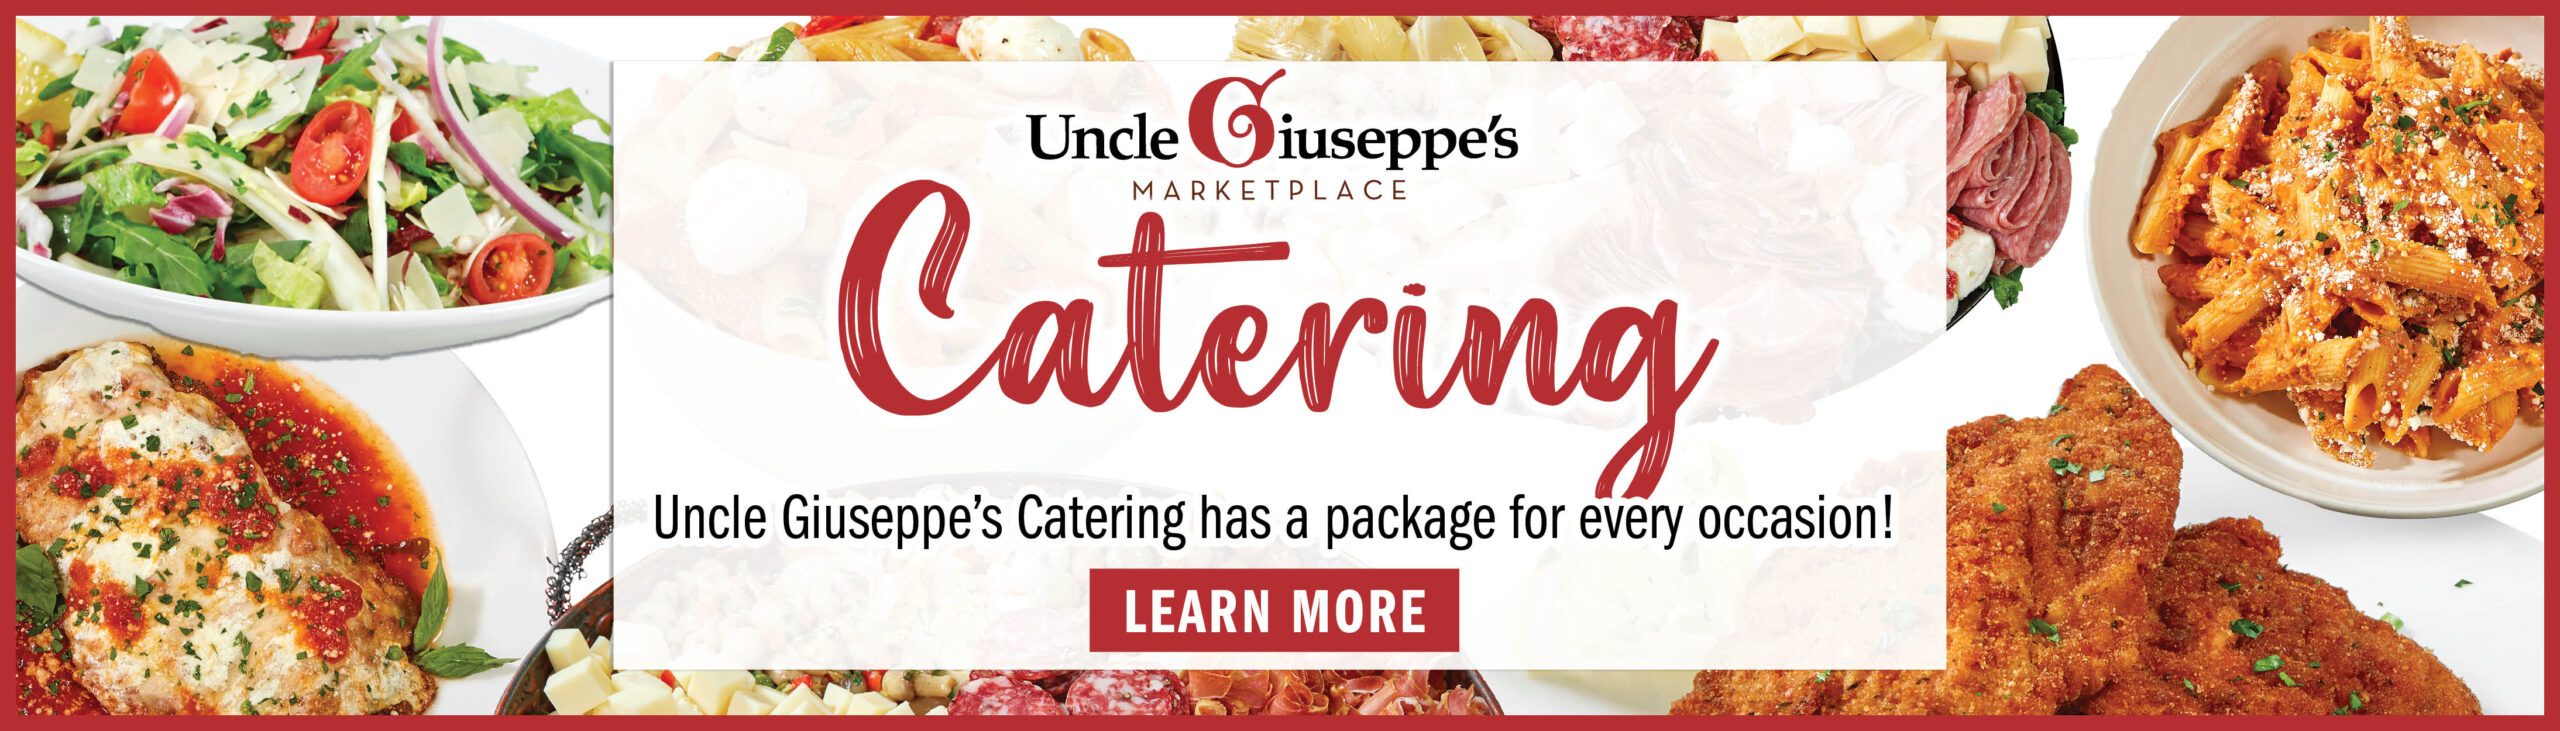 Uncle Giuseppe's Catering